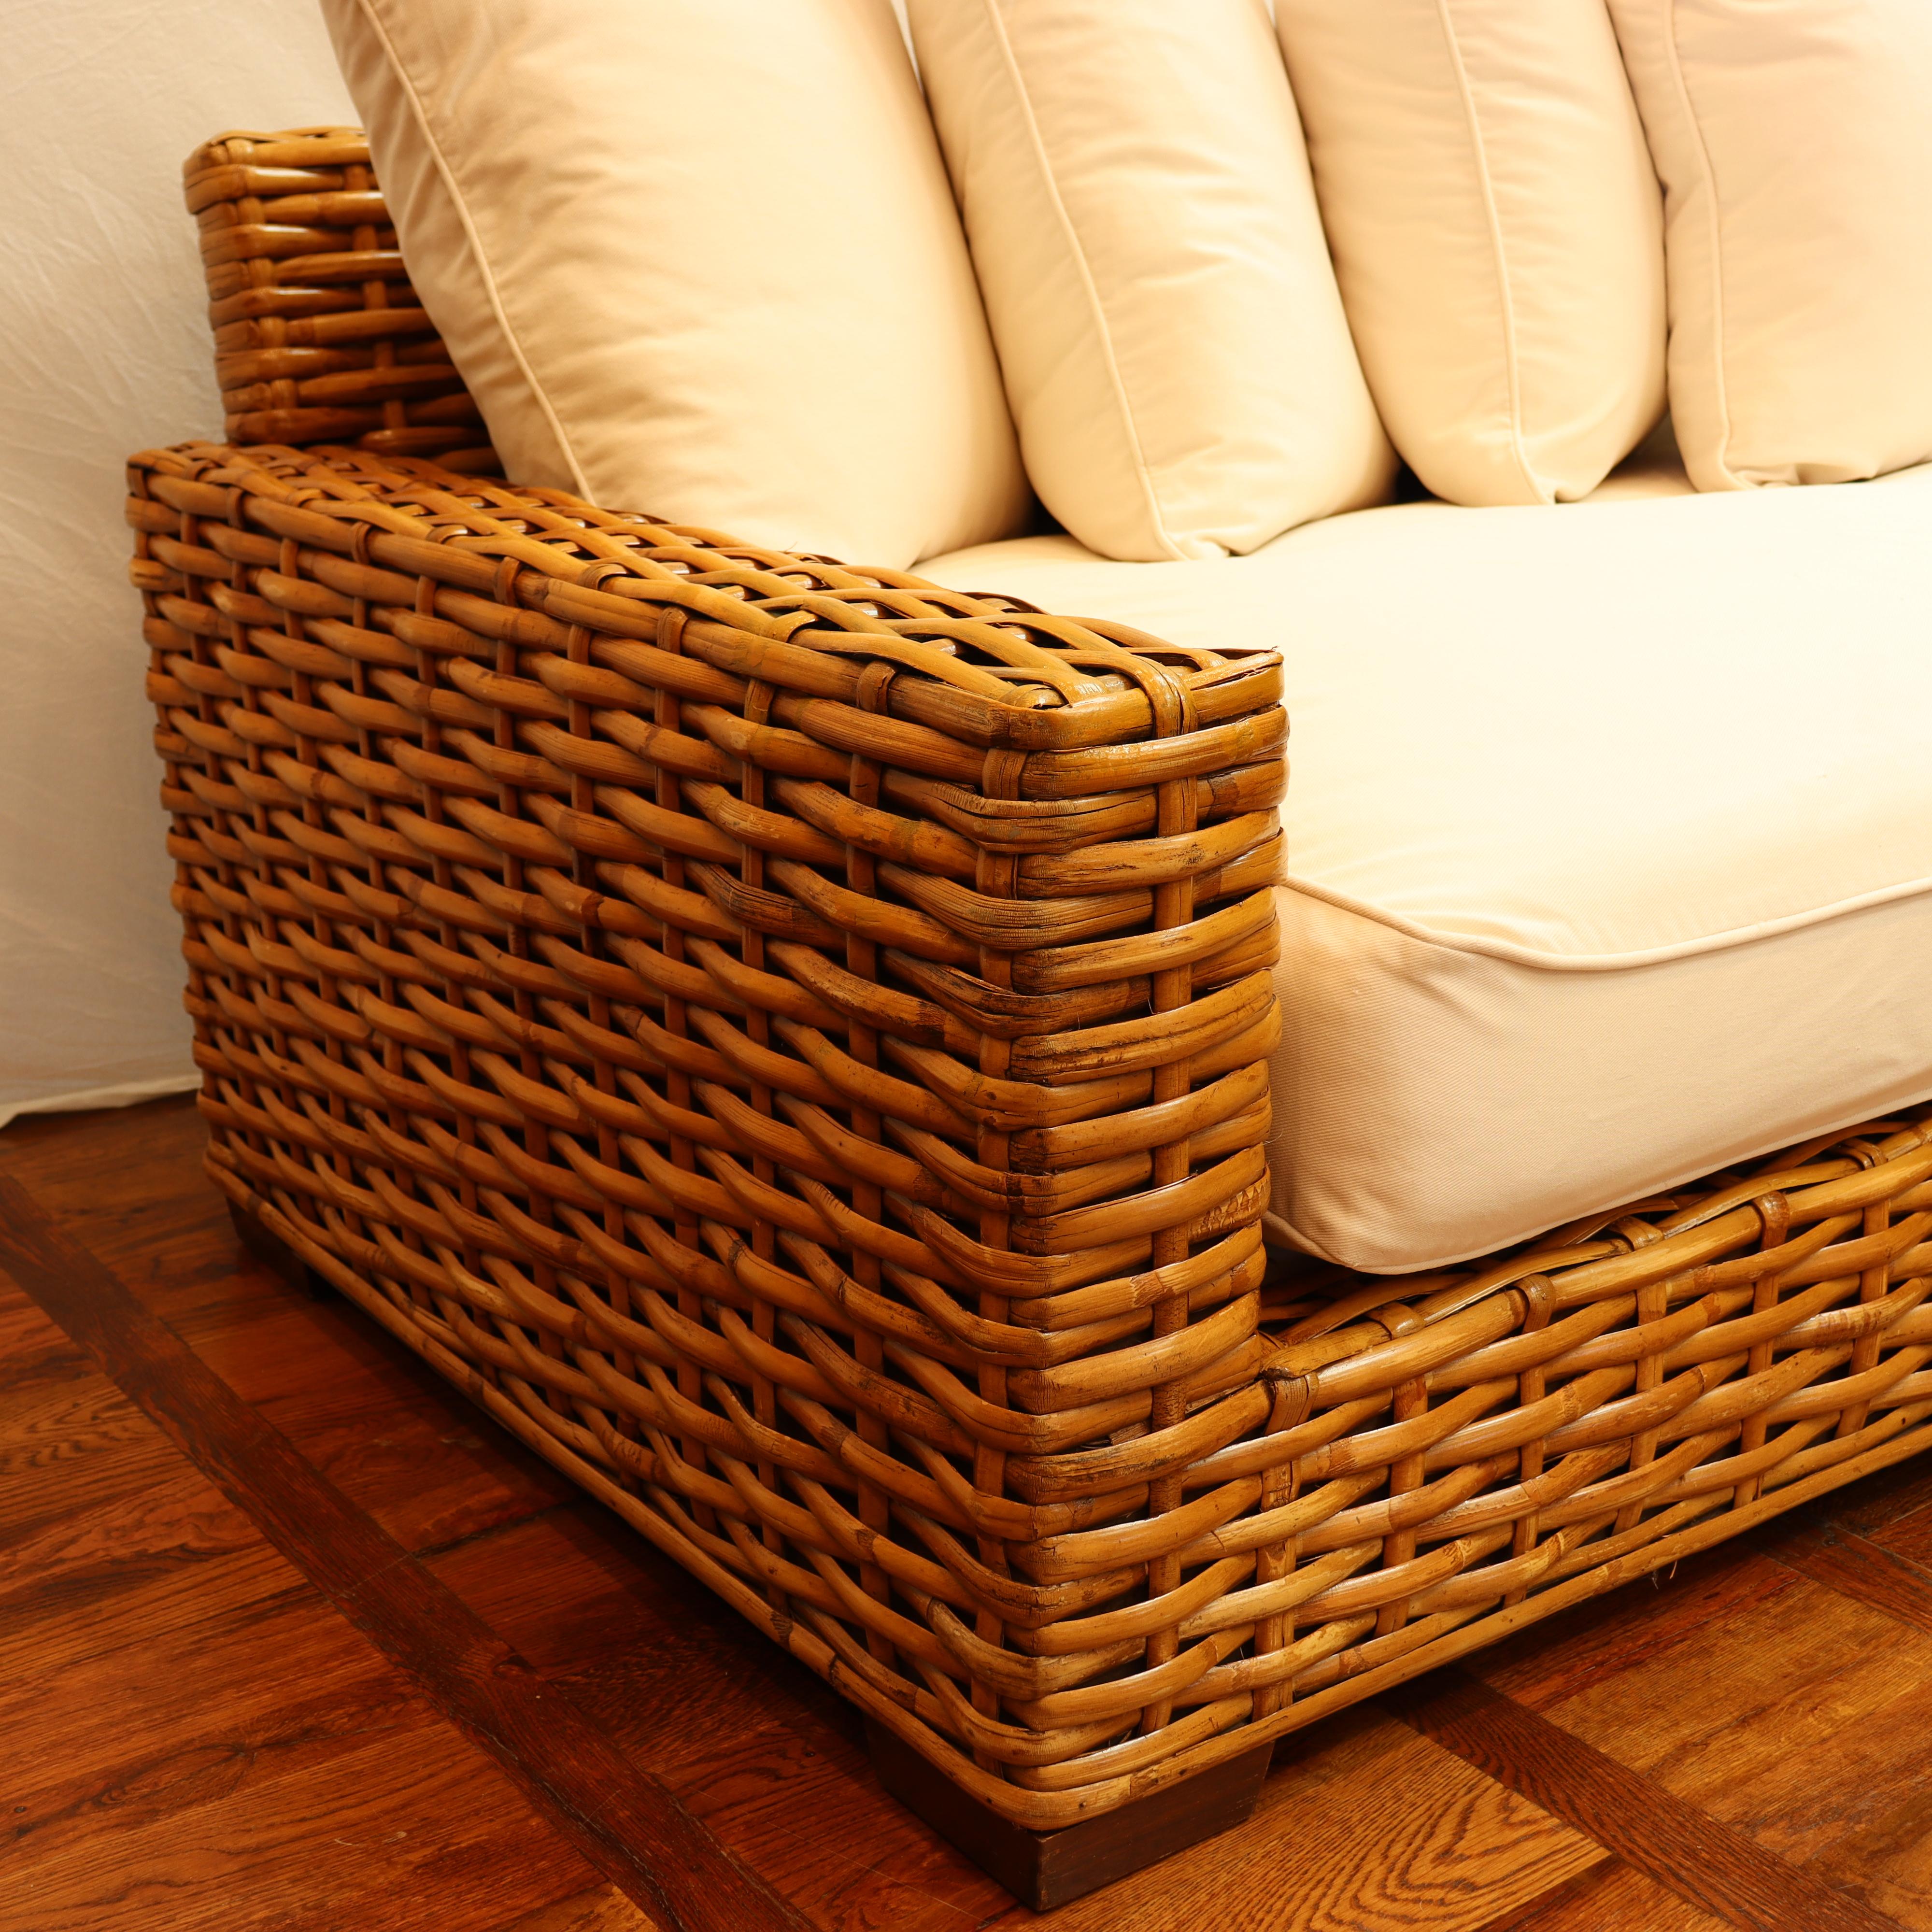 Restoration Hardware Woven Rattan Sofa w/ White Upholstery  Circa 2007  In Good Condition For Sale In Los Angeles, CA